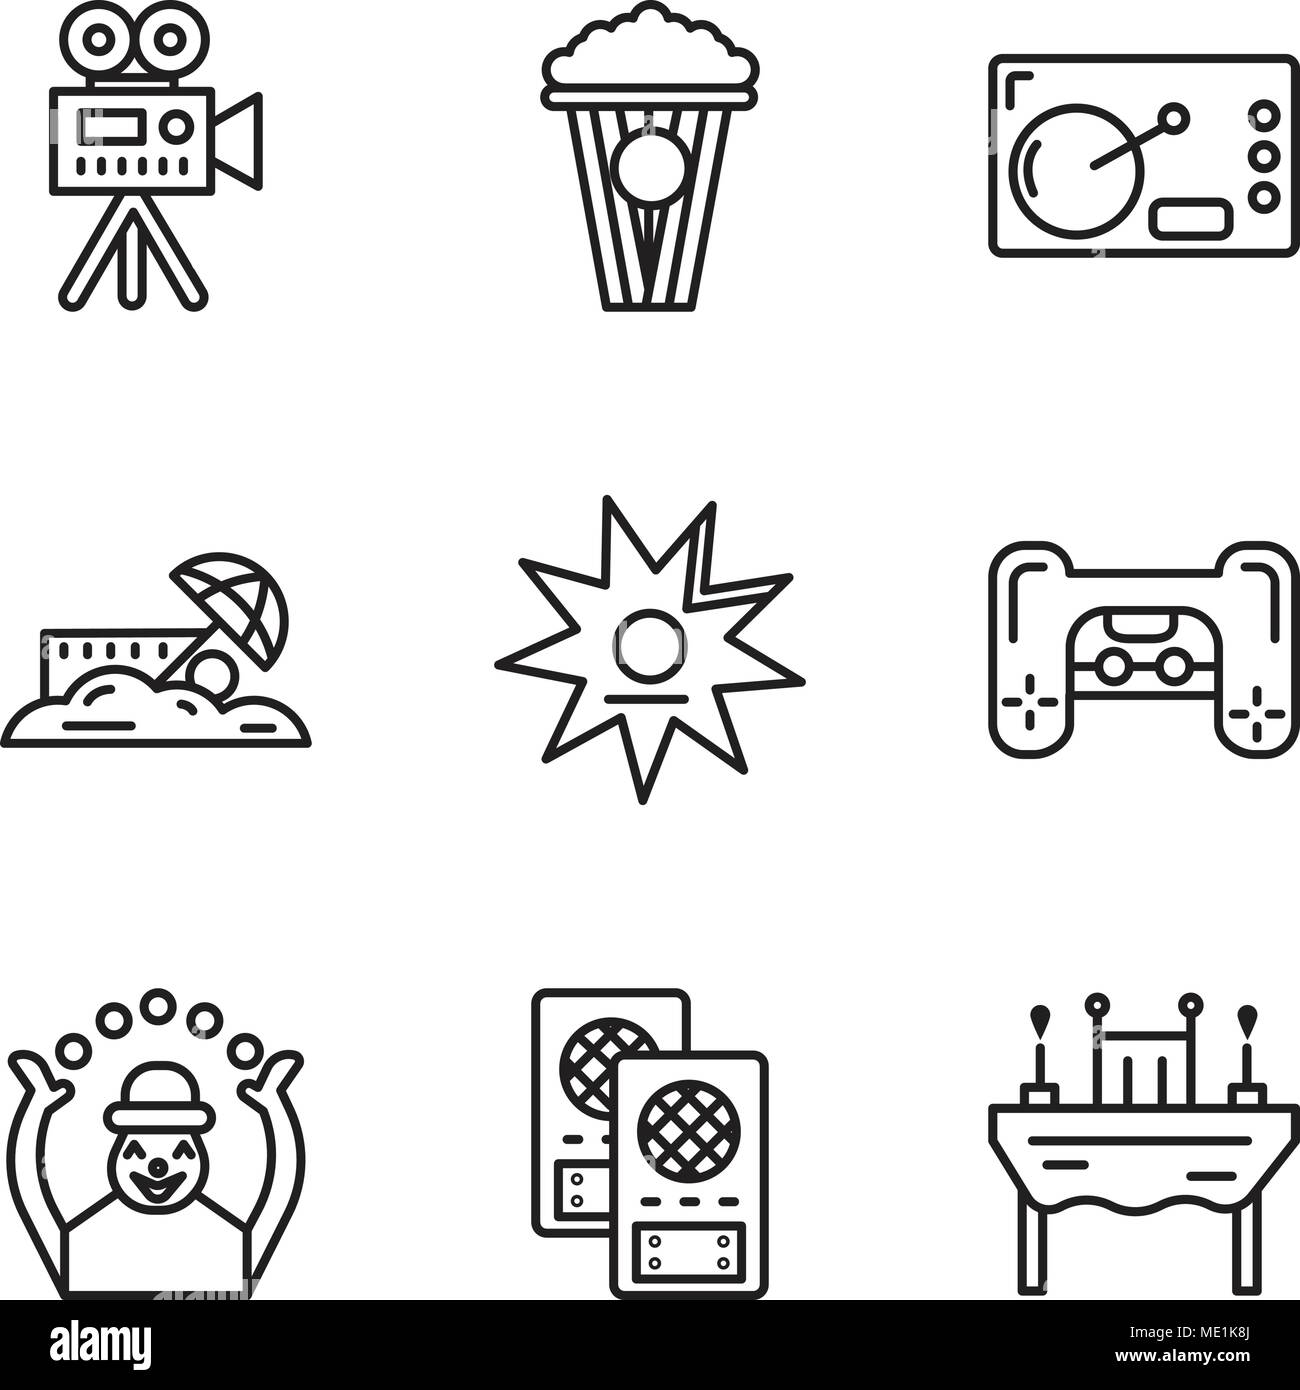 Set Of 9 simple editable icons such as Dinner, Loudspeaker, Monkey, Playstation, Walk of fame, Sand, Coffee, Popcorn, Video camera, can be used for mo Stock Vector